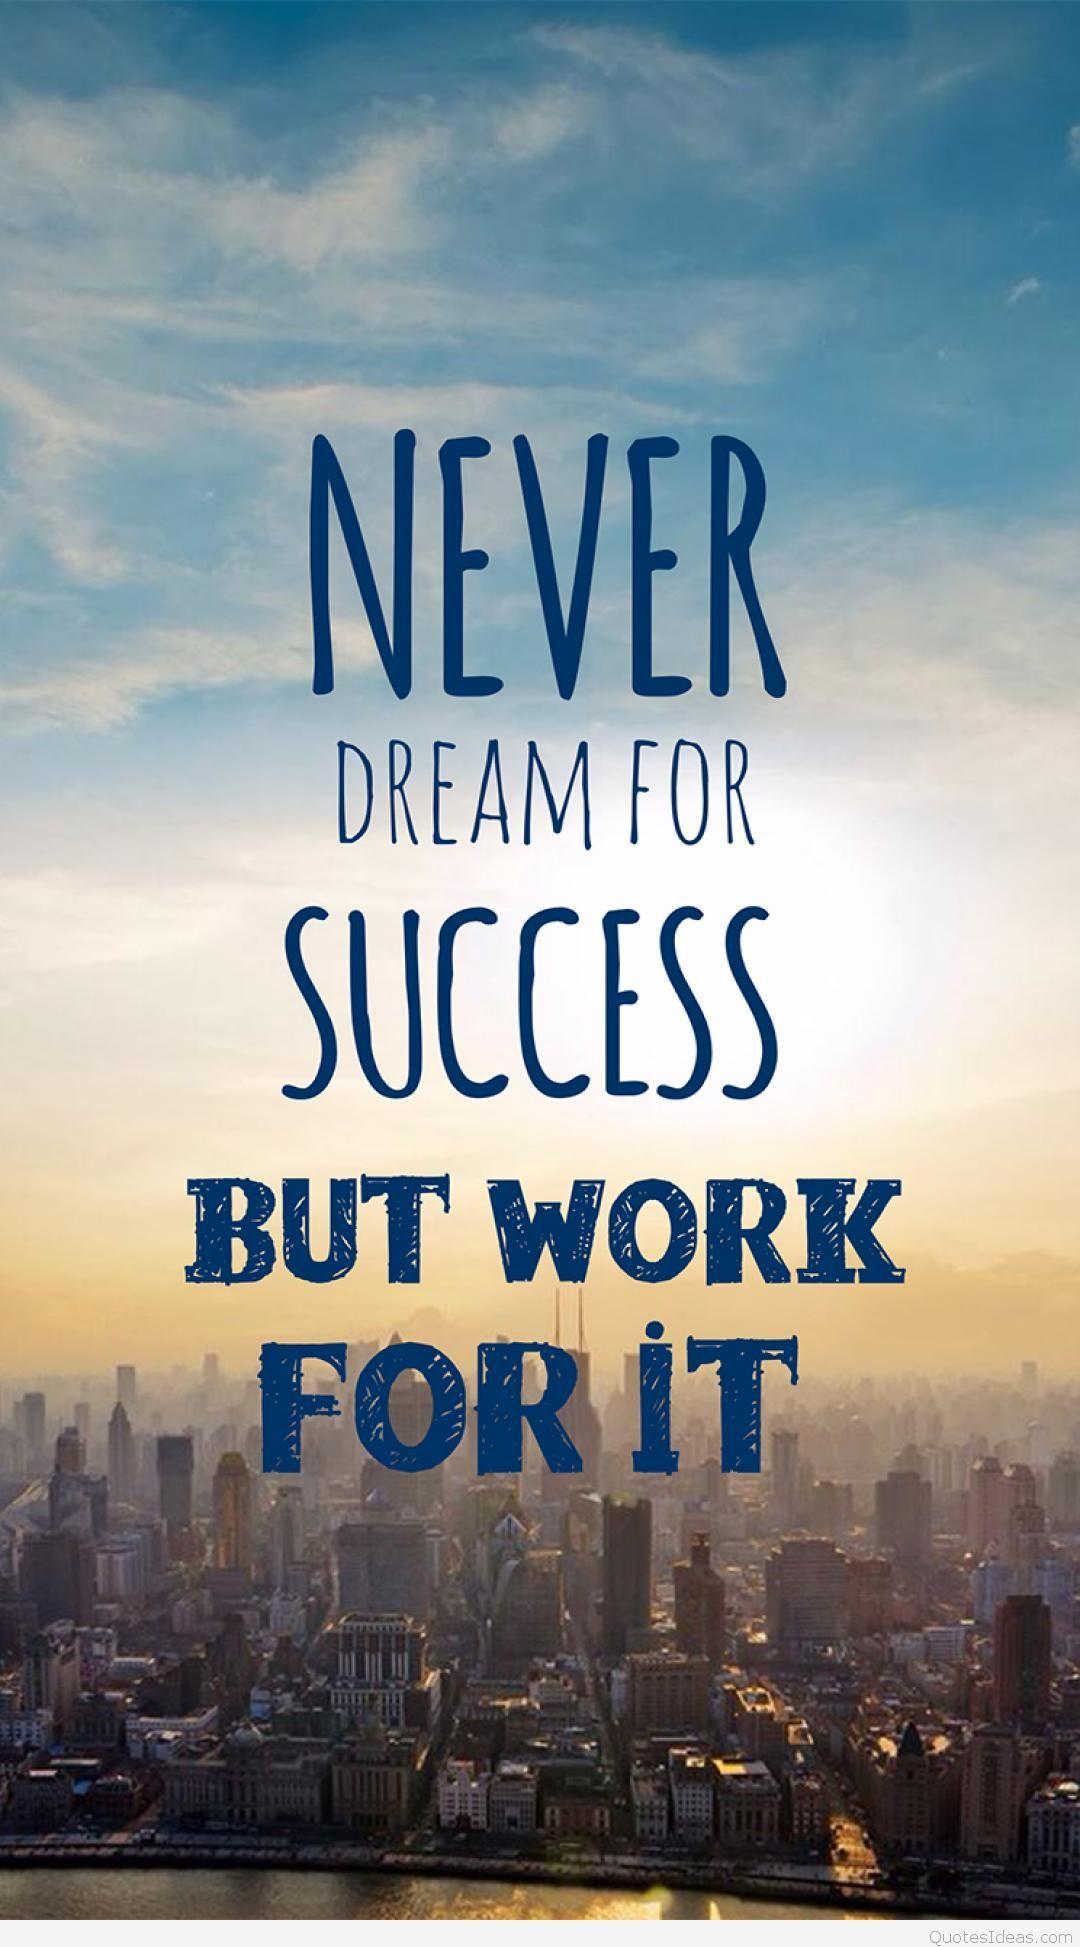 Success Quotes Wallpapers - Wallpaper Cave